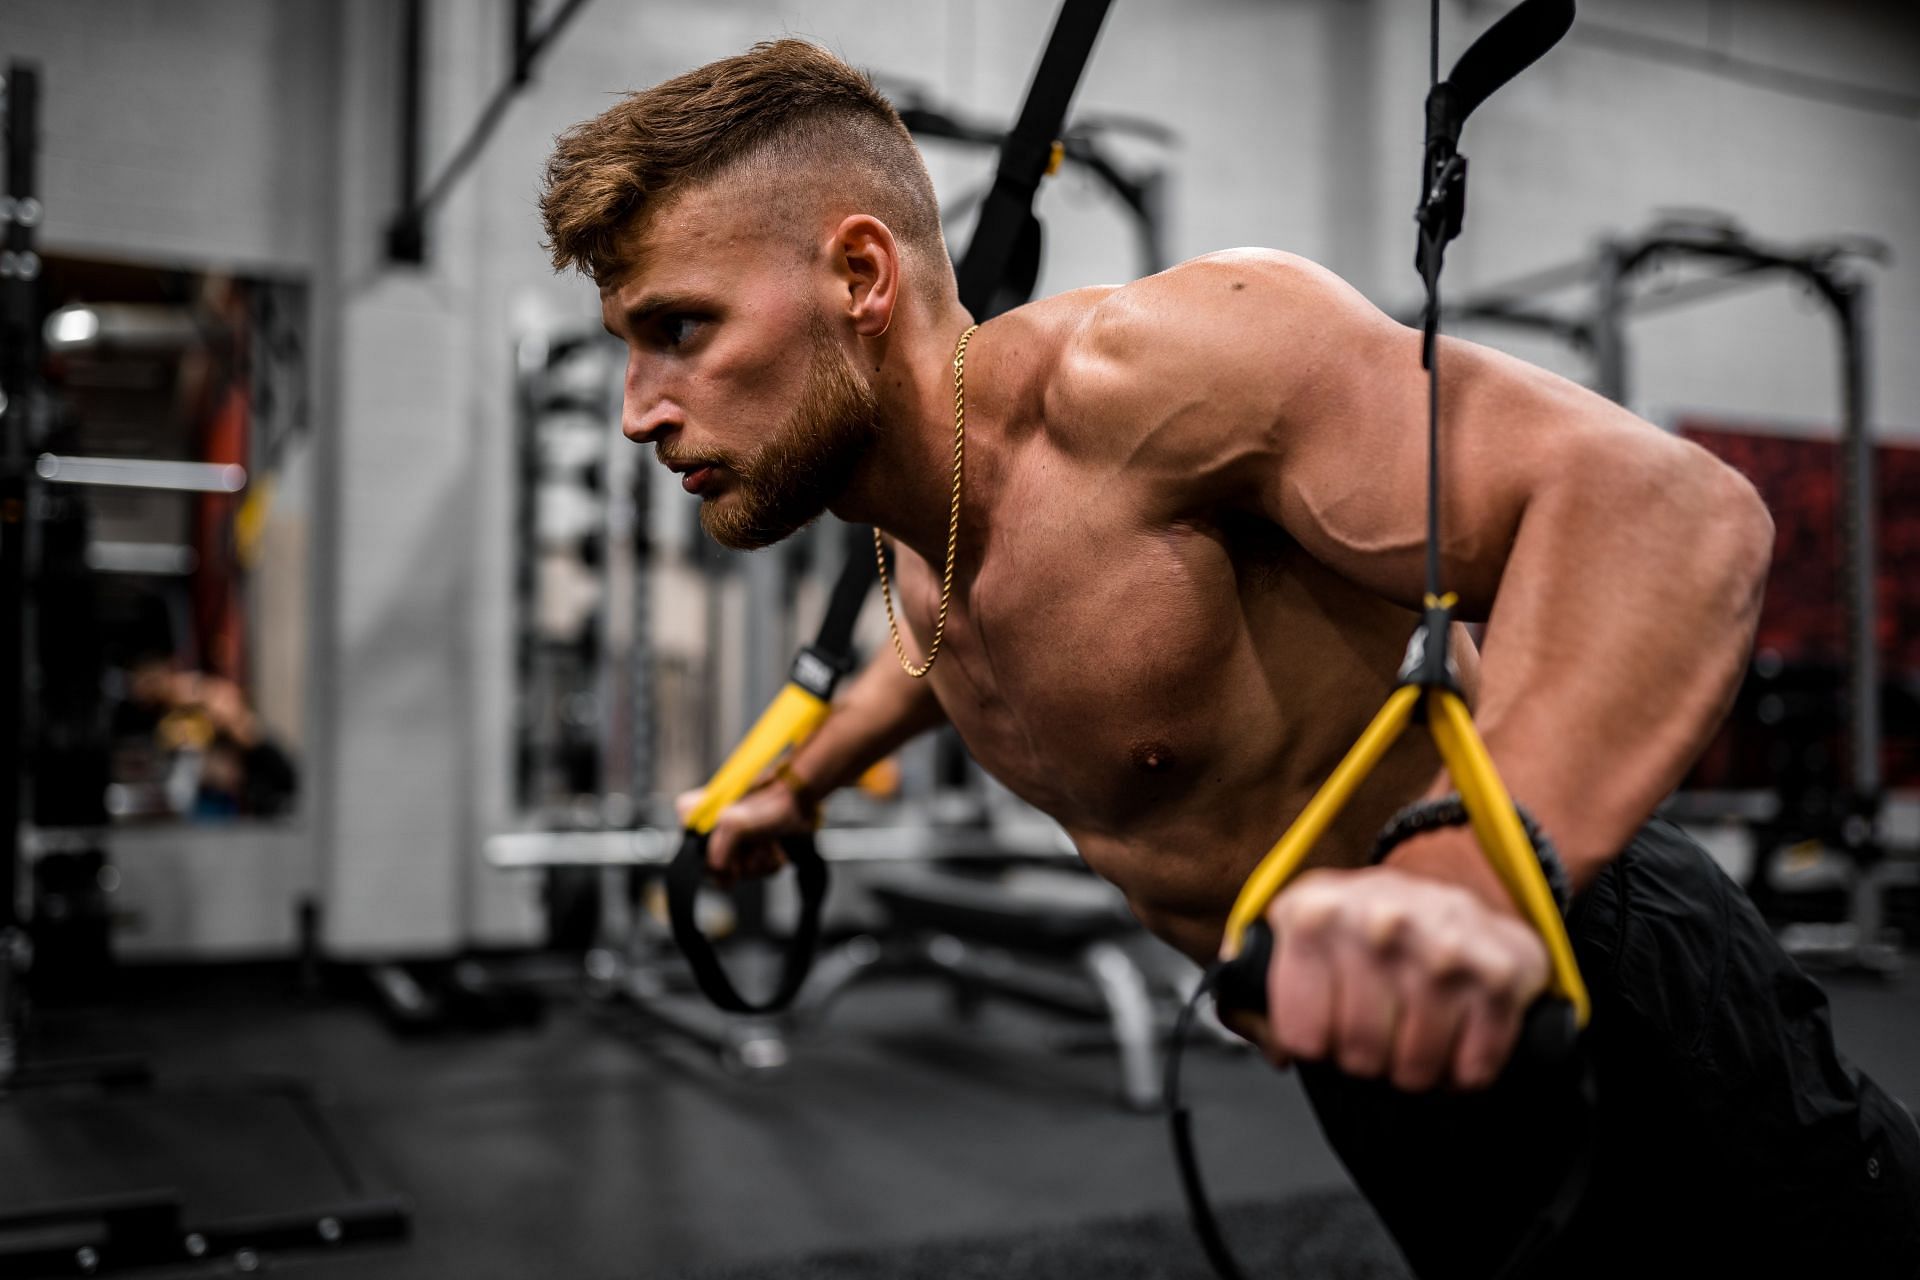 Rear delt exercises can help you gain strength and improve your range of motion. (Image via Unsplash/Anastase Maragos)